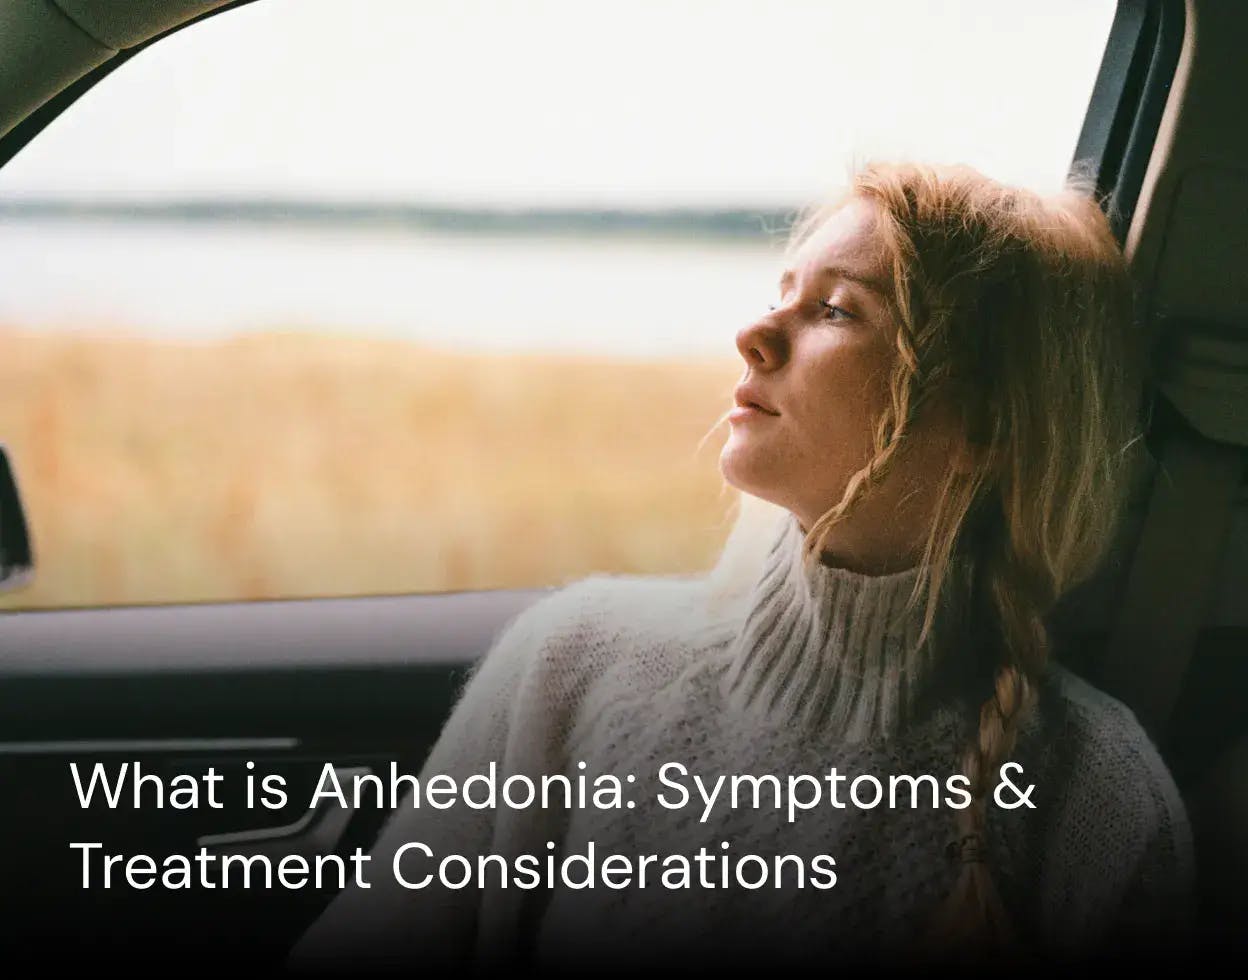 Anhedonia - girl in the car thinking about something related to experience pleasure and interest